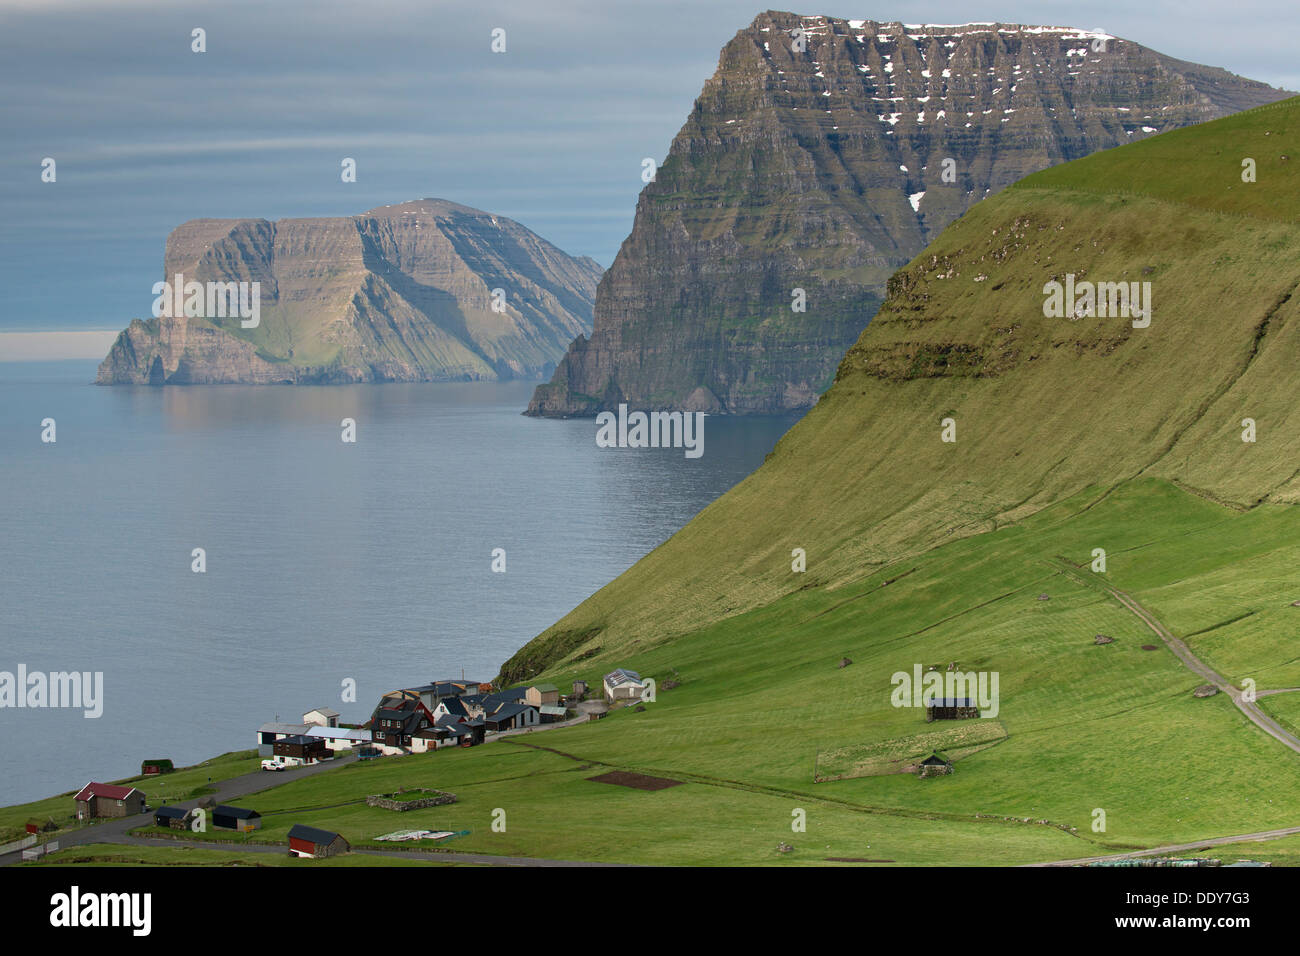 Island of Viðoy with Cape Enniberg and the village of Kunoy Stock Photo